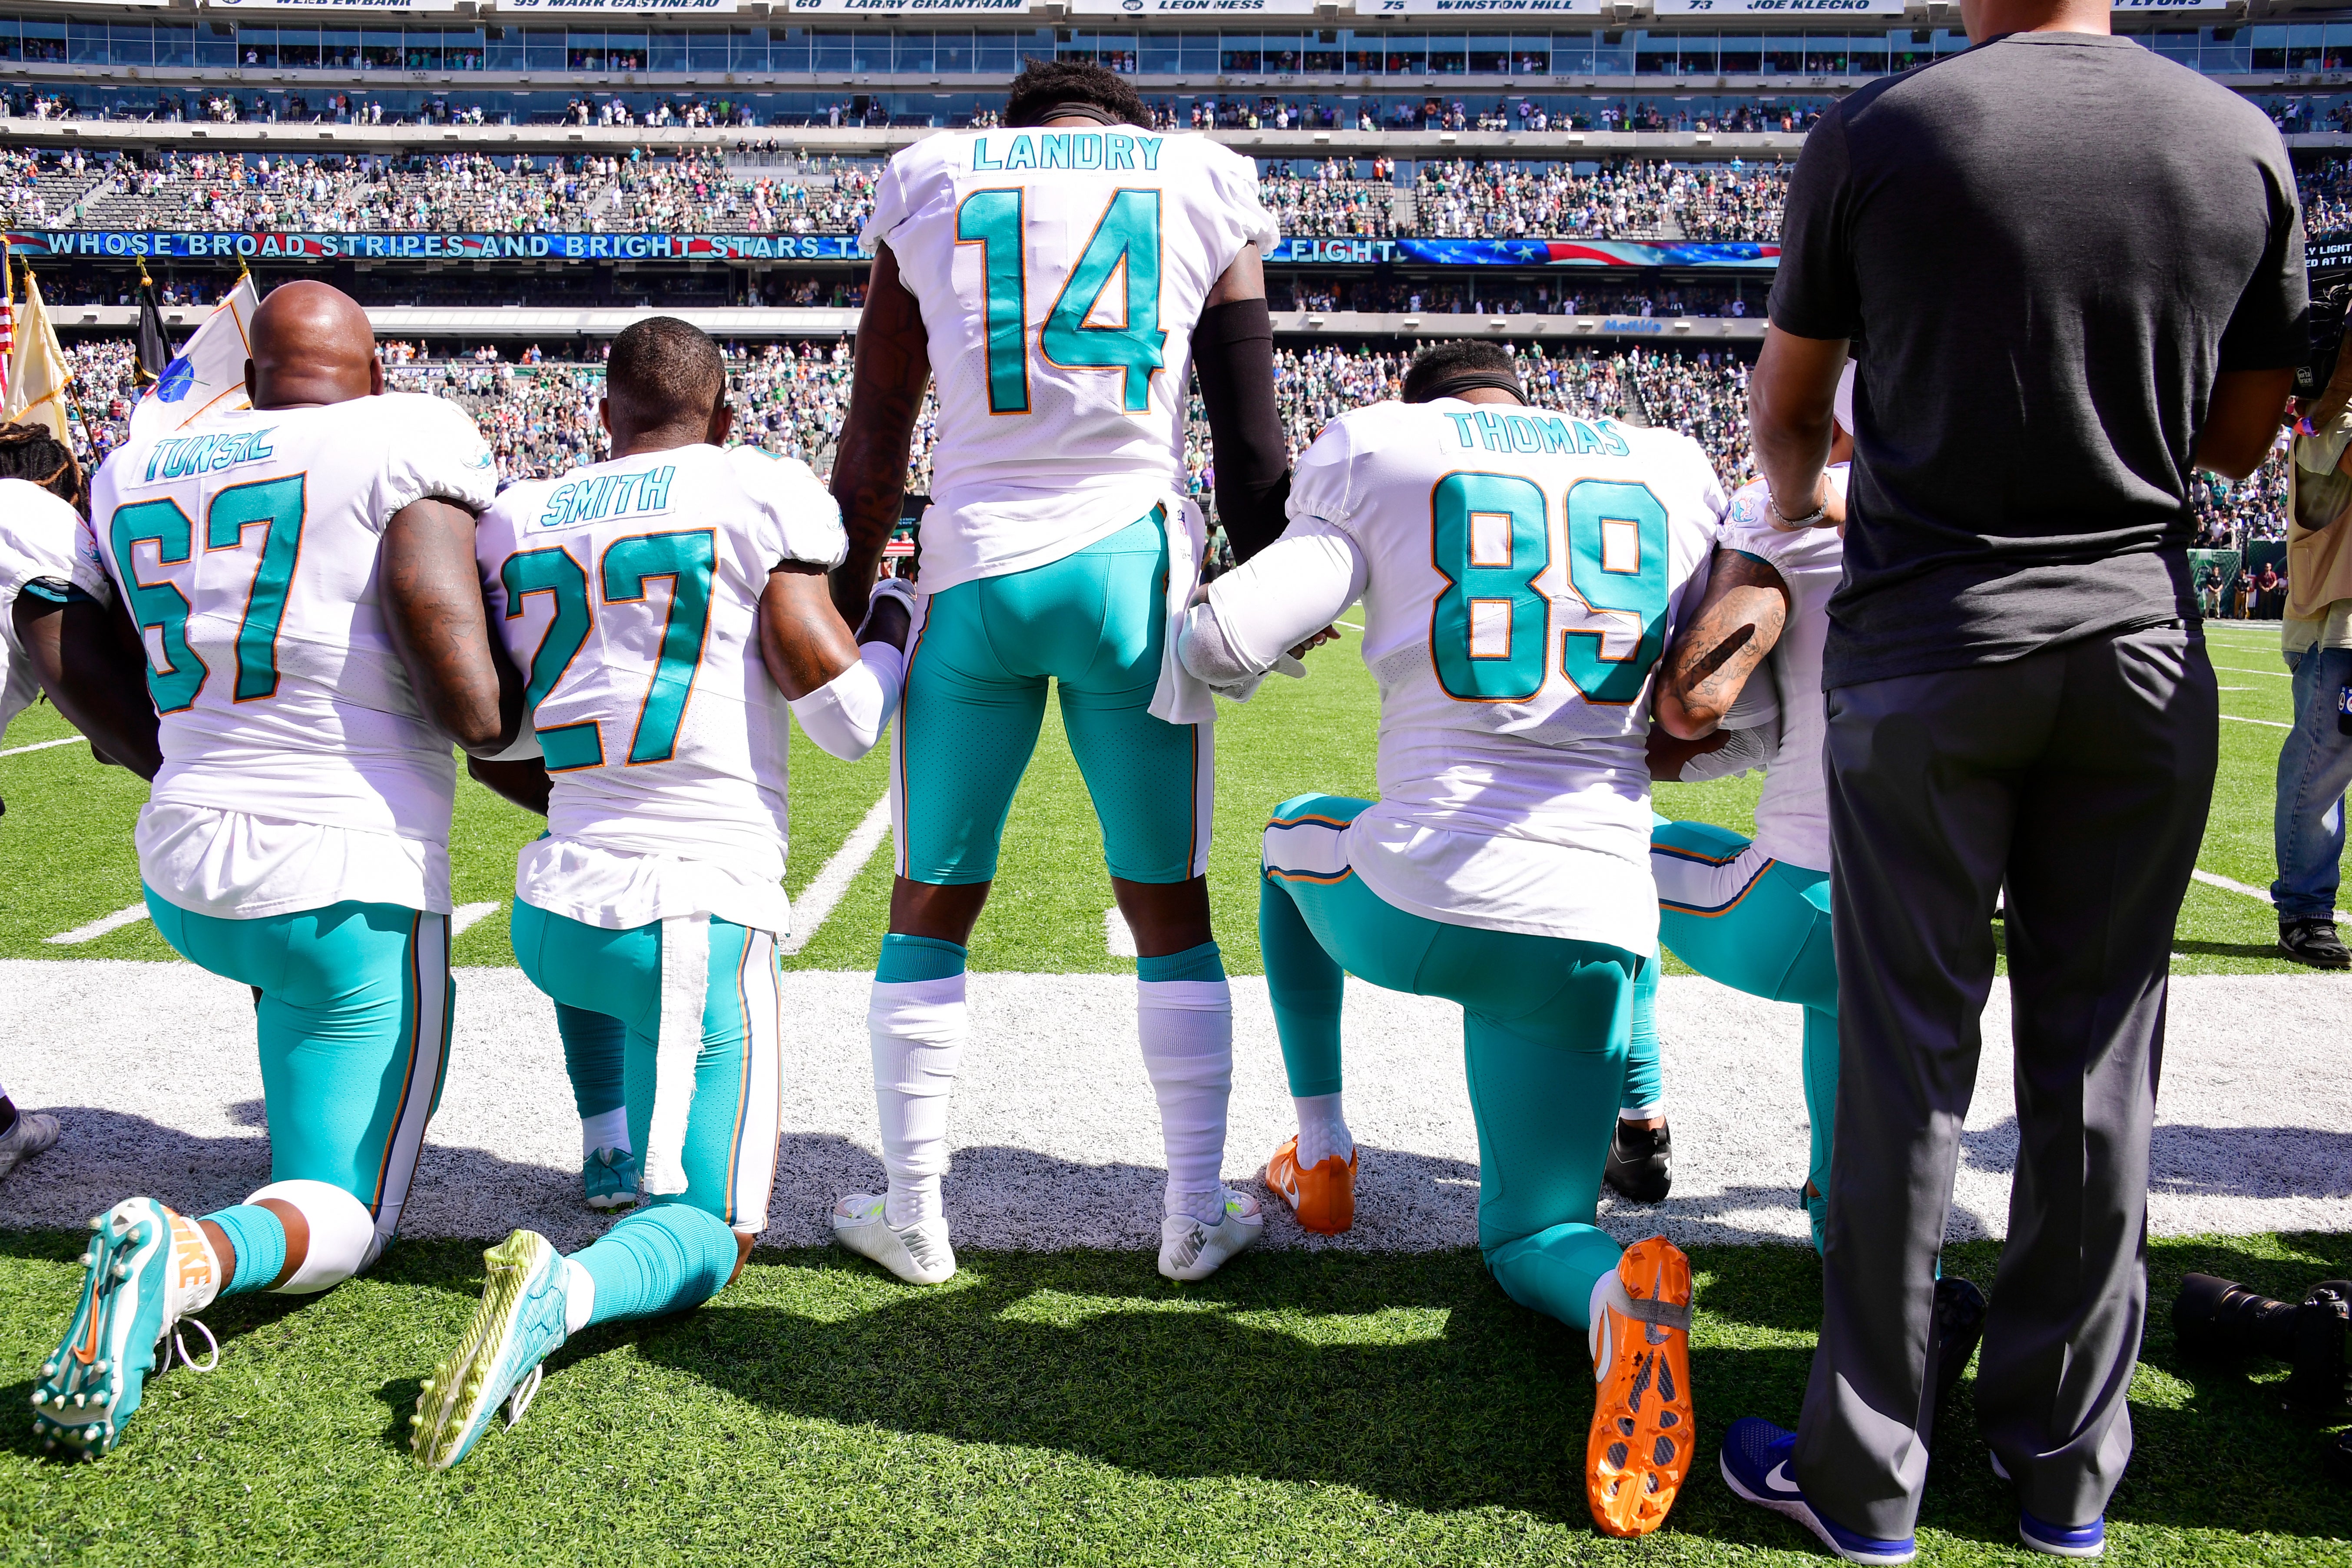 #TakeAKnee: Celebs And NFL Stars React To Trump's Latest Criticism Of National Anthem Protests
